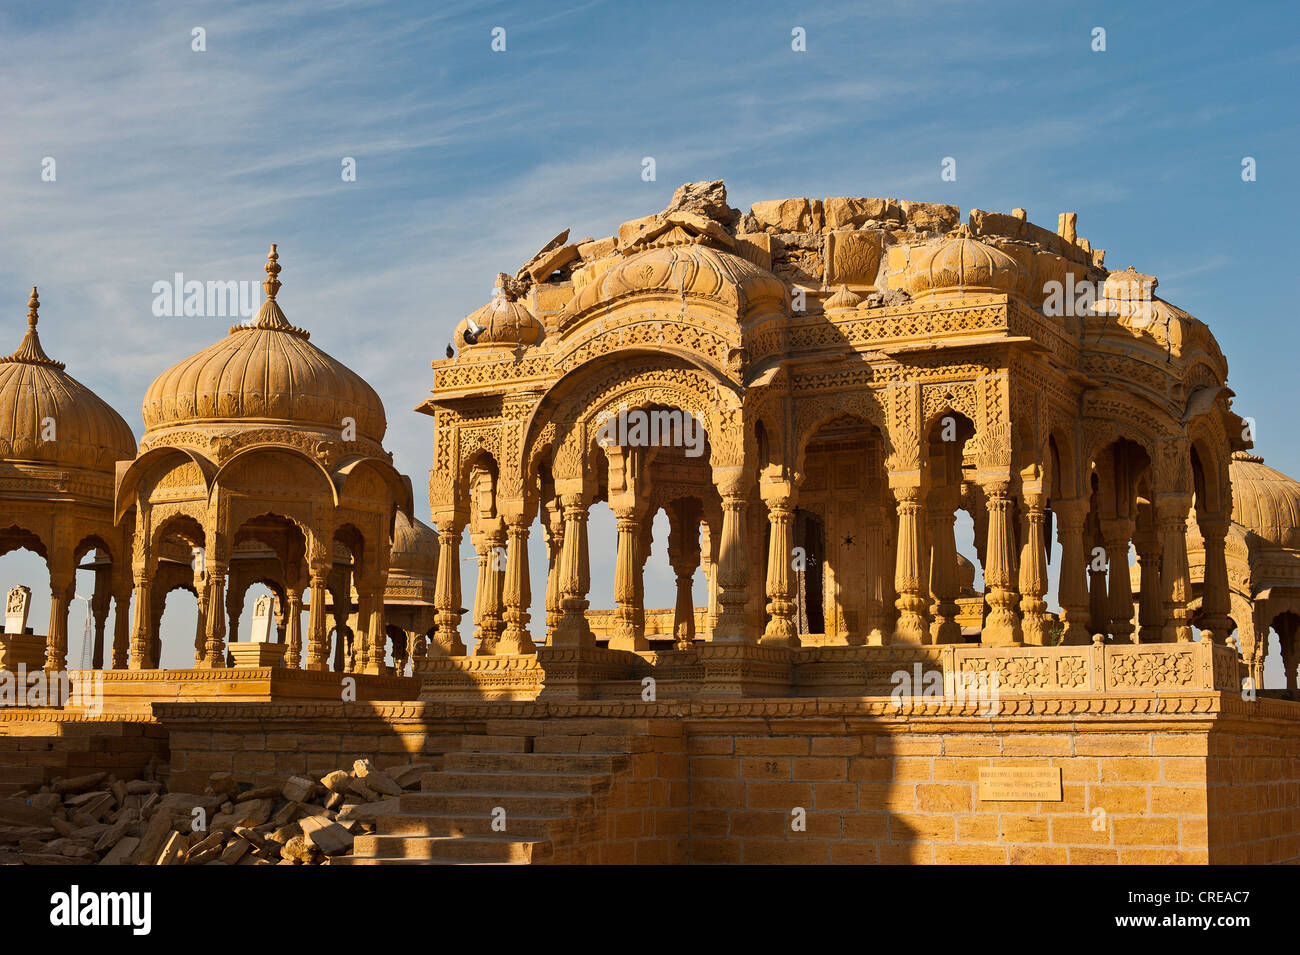 Cenotaph, old burial ground of the rulers of Jaisalmer, Rajasthan, India, Asia Stock Photo